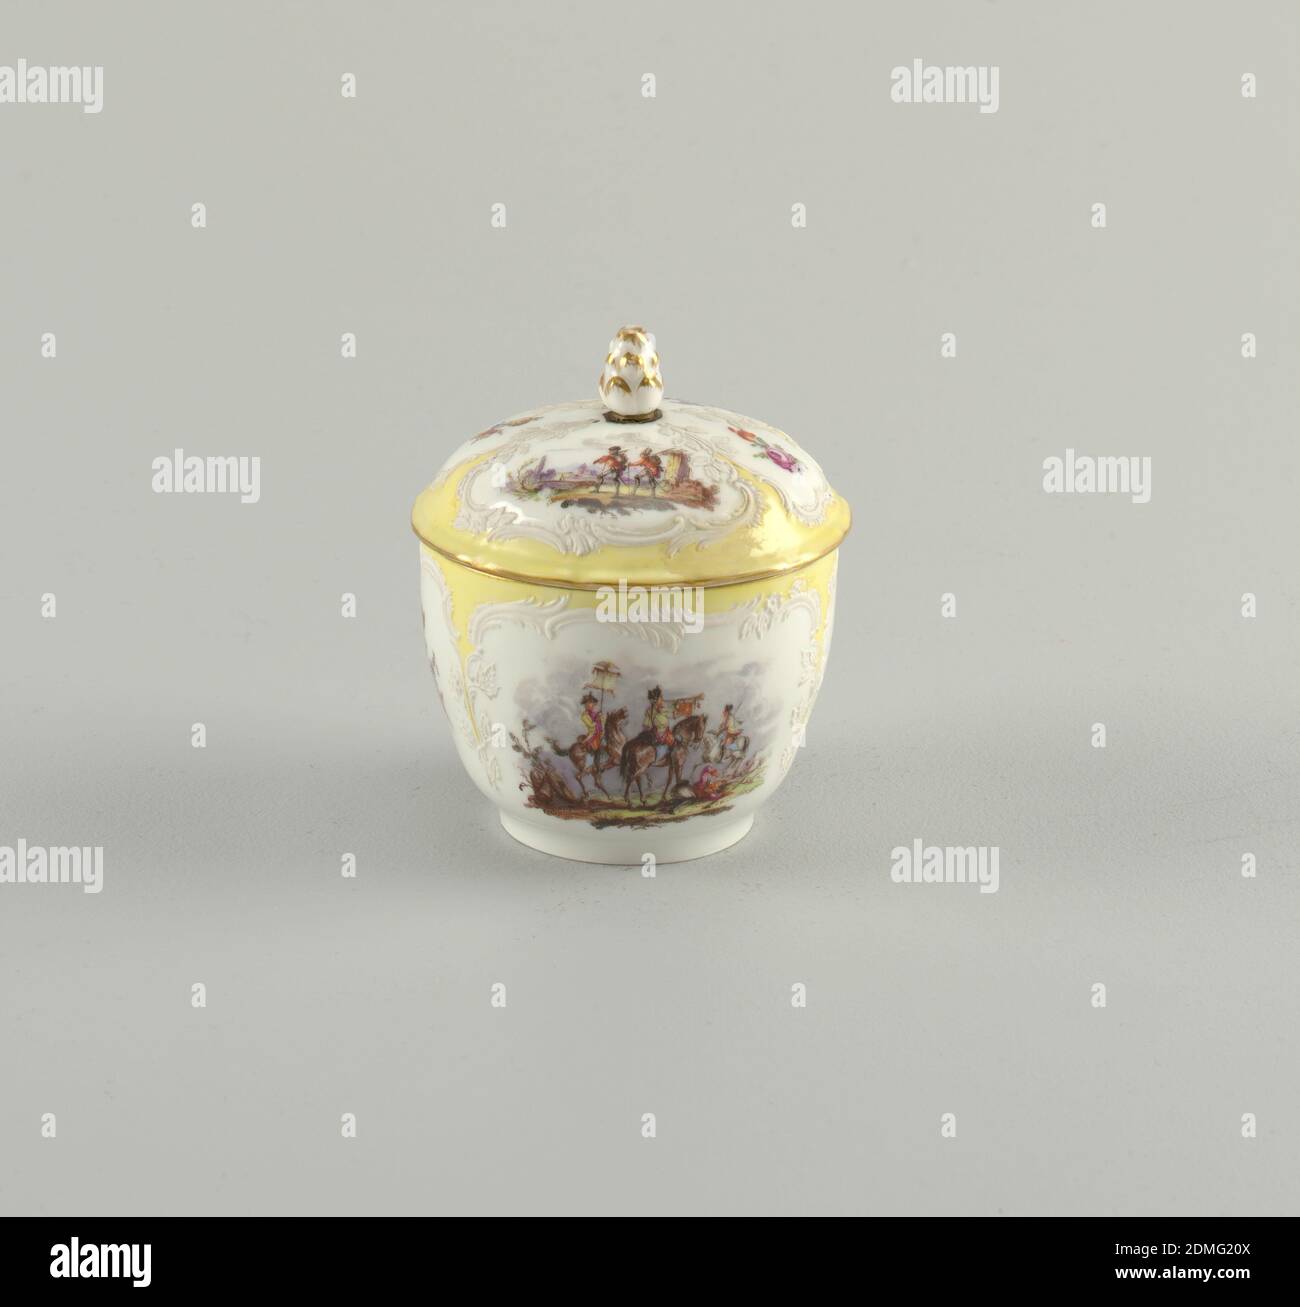 Sugar Bowl with Battle Scenes (Bataillen-Malerei), Royal Porcelain Manufactory, Berlin, German, established 1763, hard paste porcelain, vitreous enamel, gold, Curved bowl, slightly compressed in lower parts. Domed cover with pine-cone knob. Decorations show soldiers on campaign. Neuzierat style., Germany, 1870–1900, ceramics, Decorative Arts, sugar bowl, sugar bowl Stock Photo